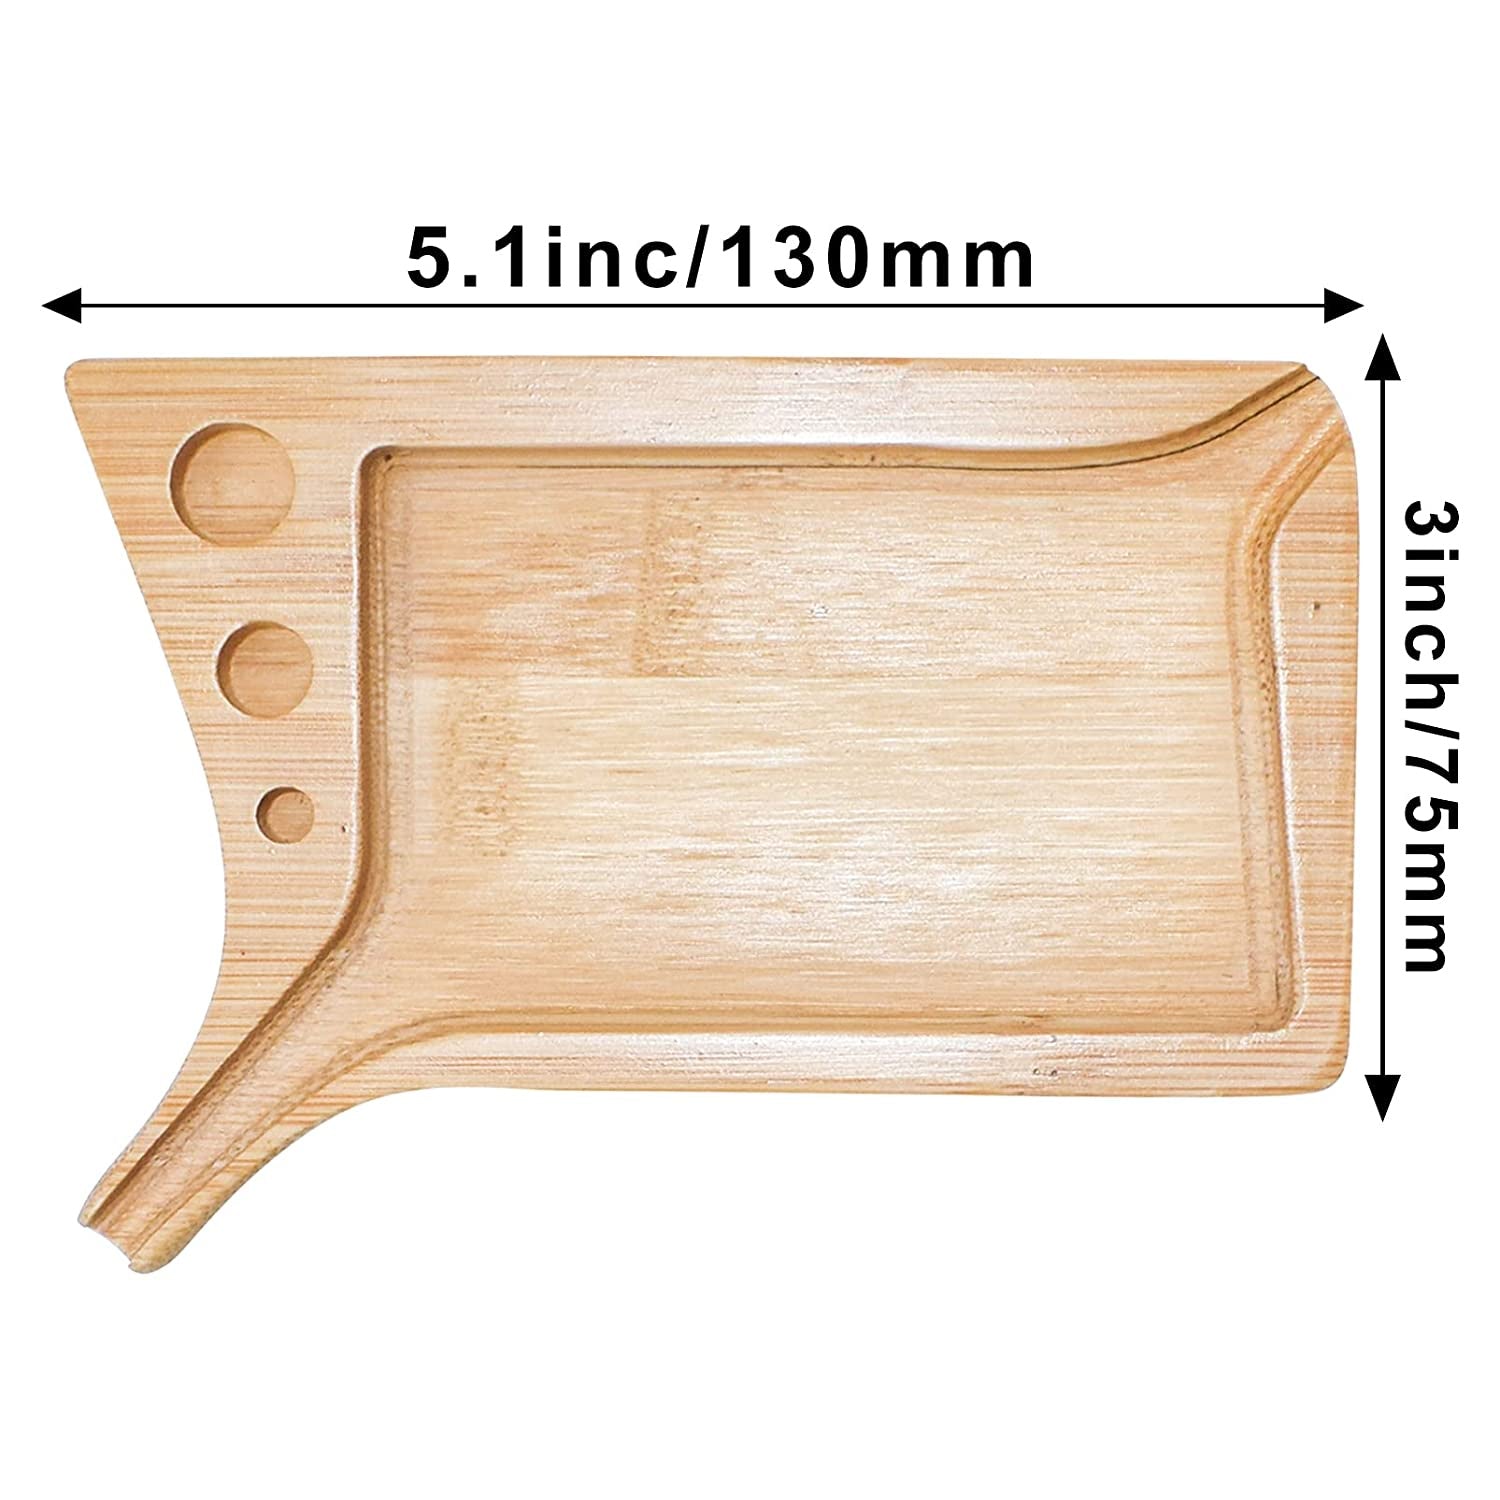 Mini Bamboo Cone Loader Rolling Tray (MSRP: $9.99)